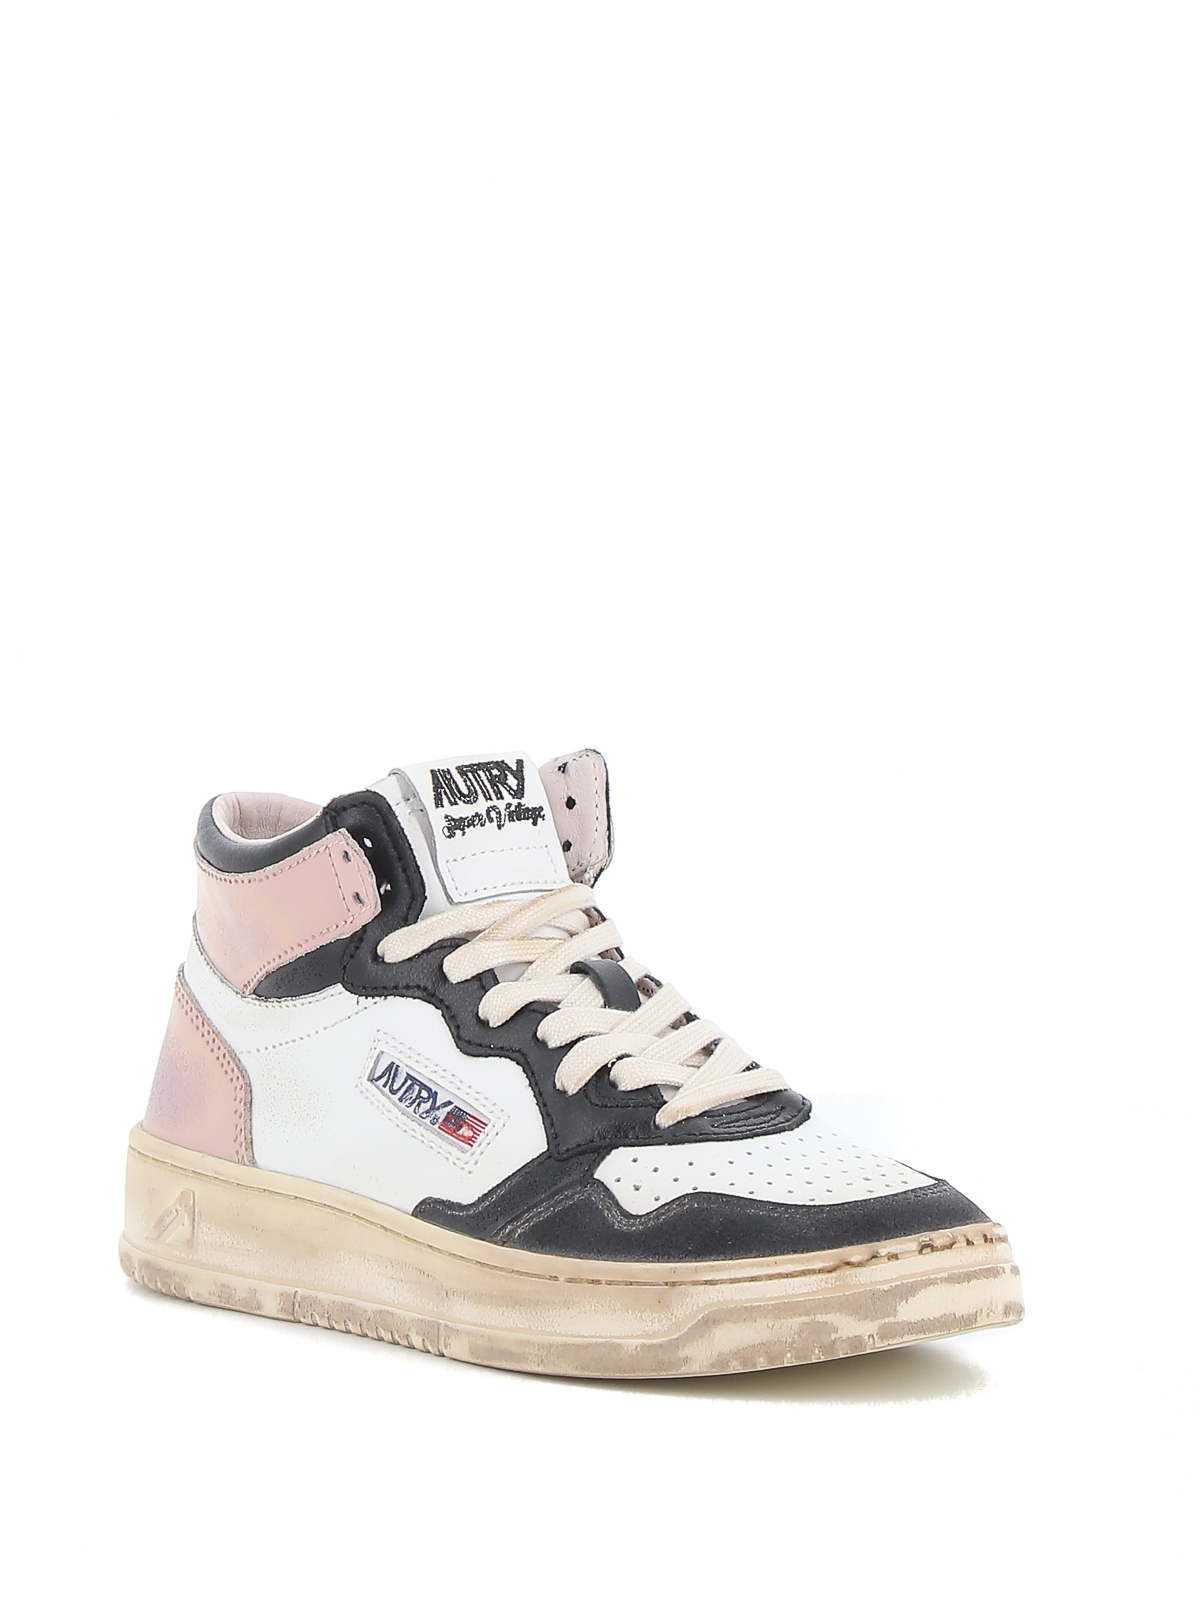 Trainers Autry - Super Vintage sneakers - AVMWSV01 | Shop online at iKRIX